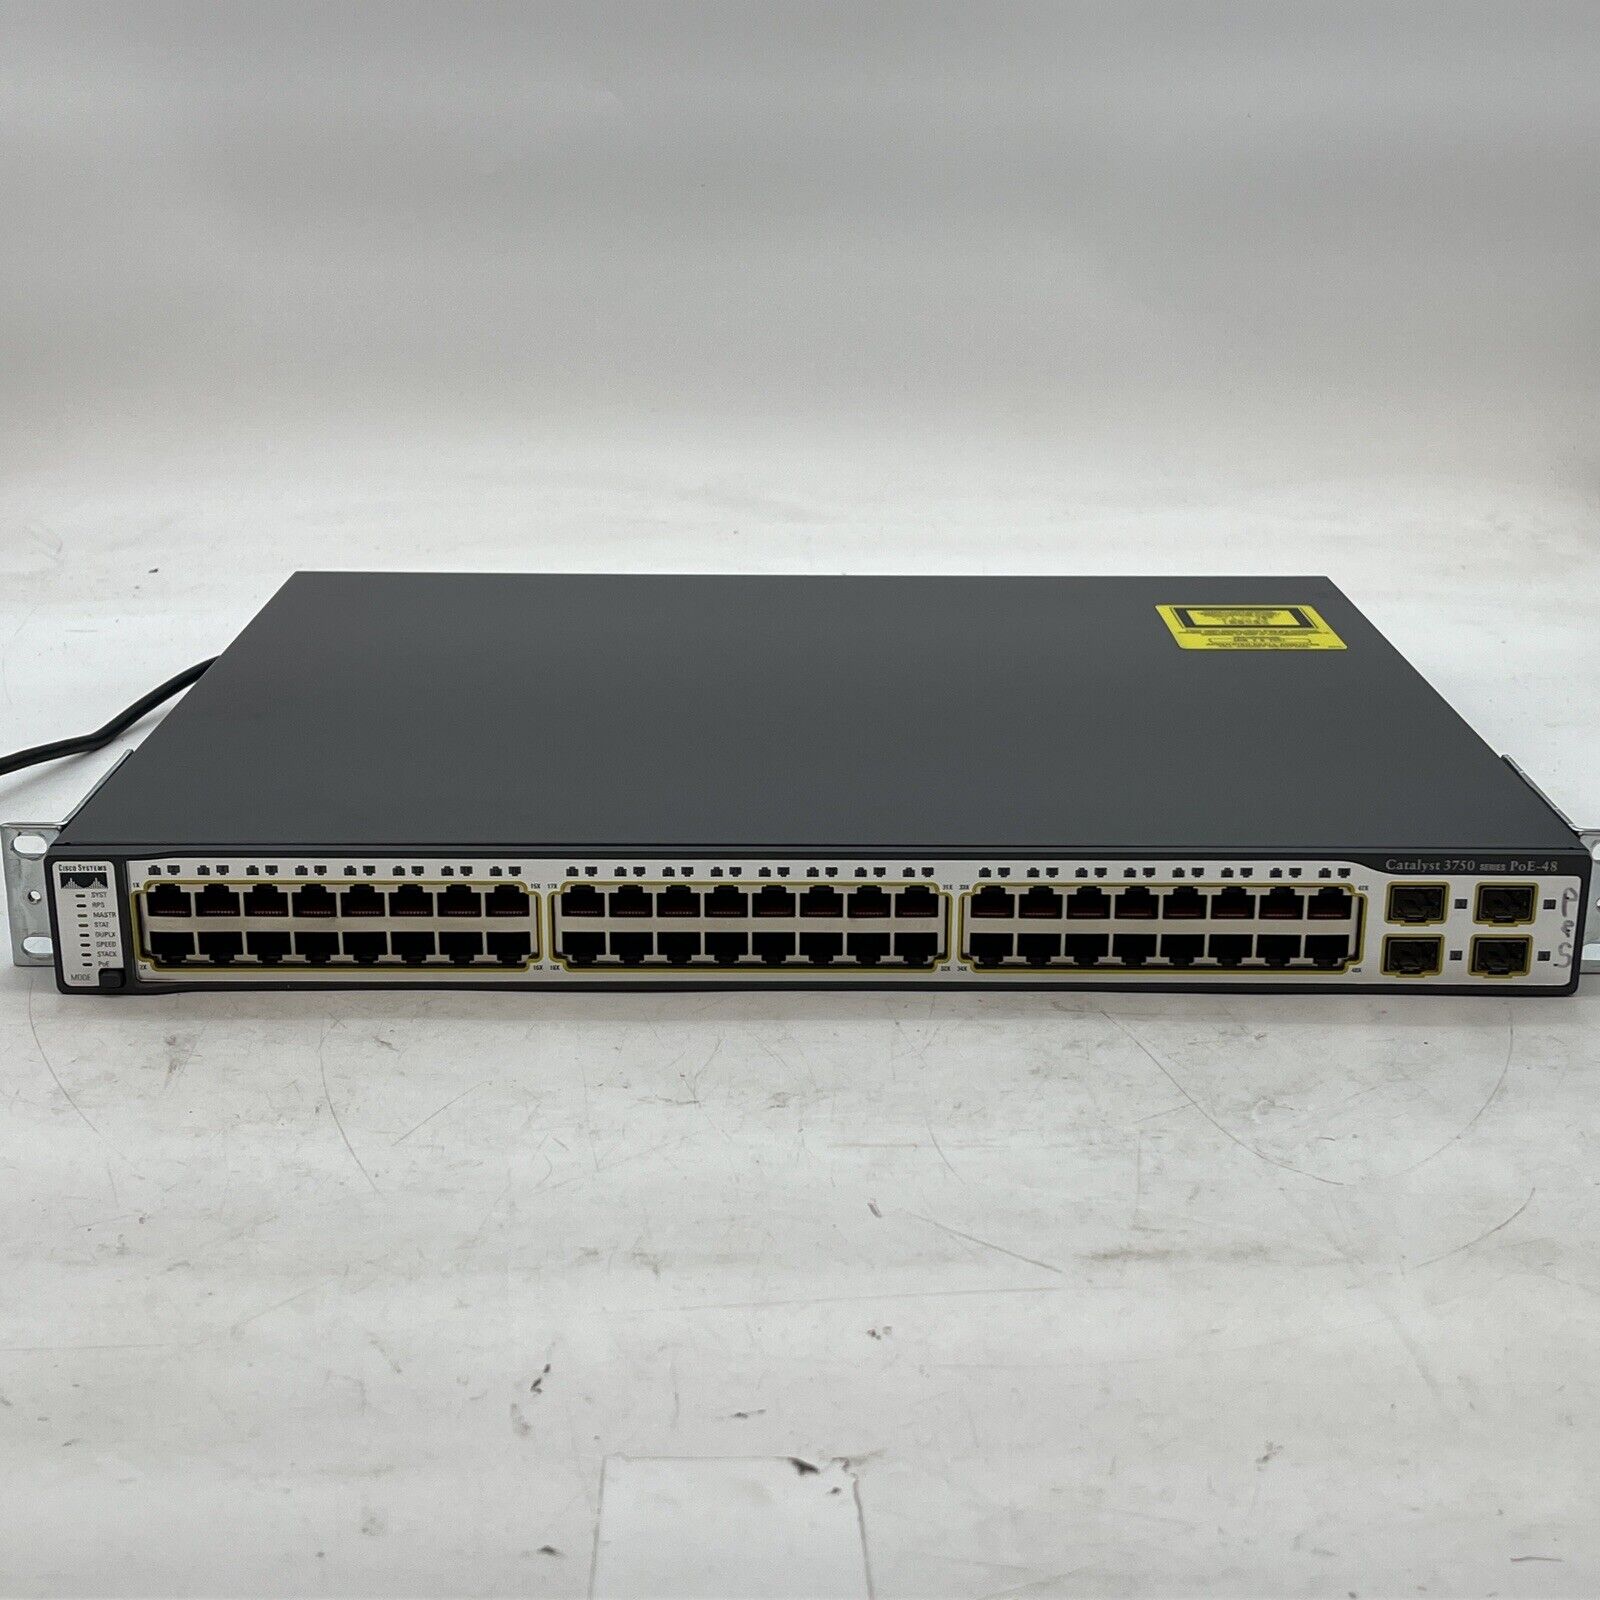 Cisco 3750 WS-C3750-48PS-S 48-Port PoE Managed Ethernet Network Switch